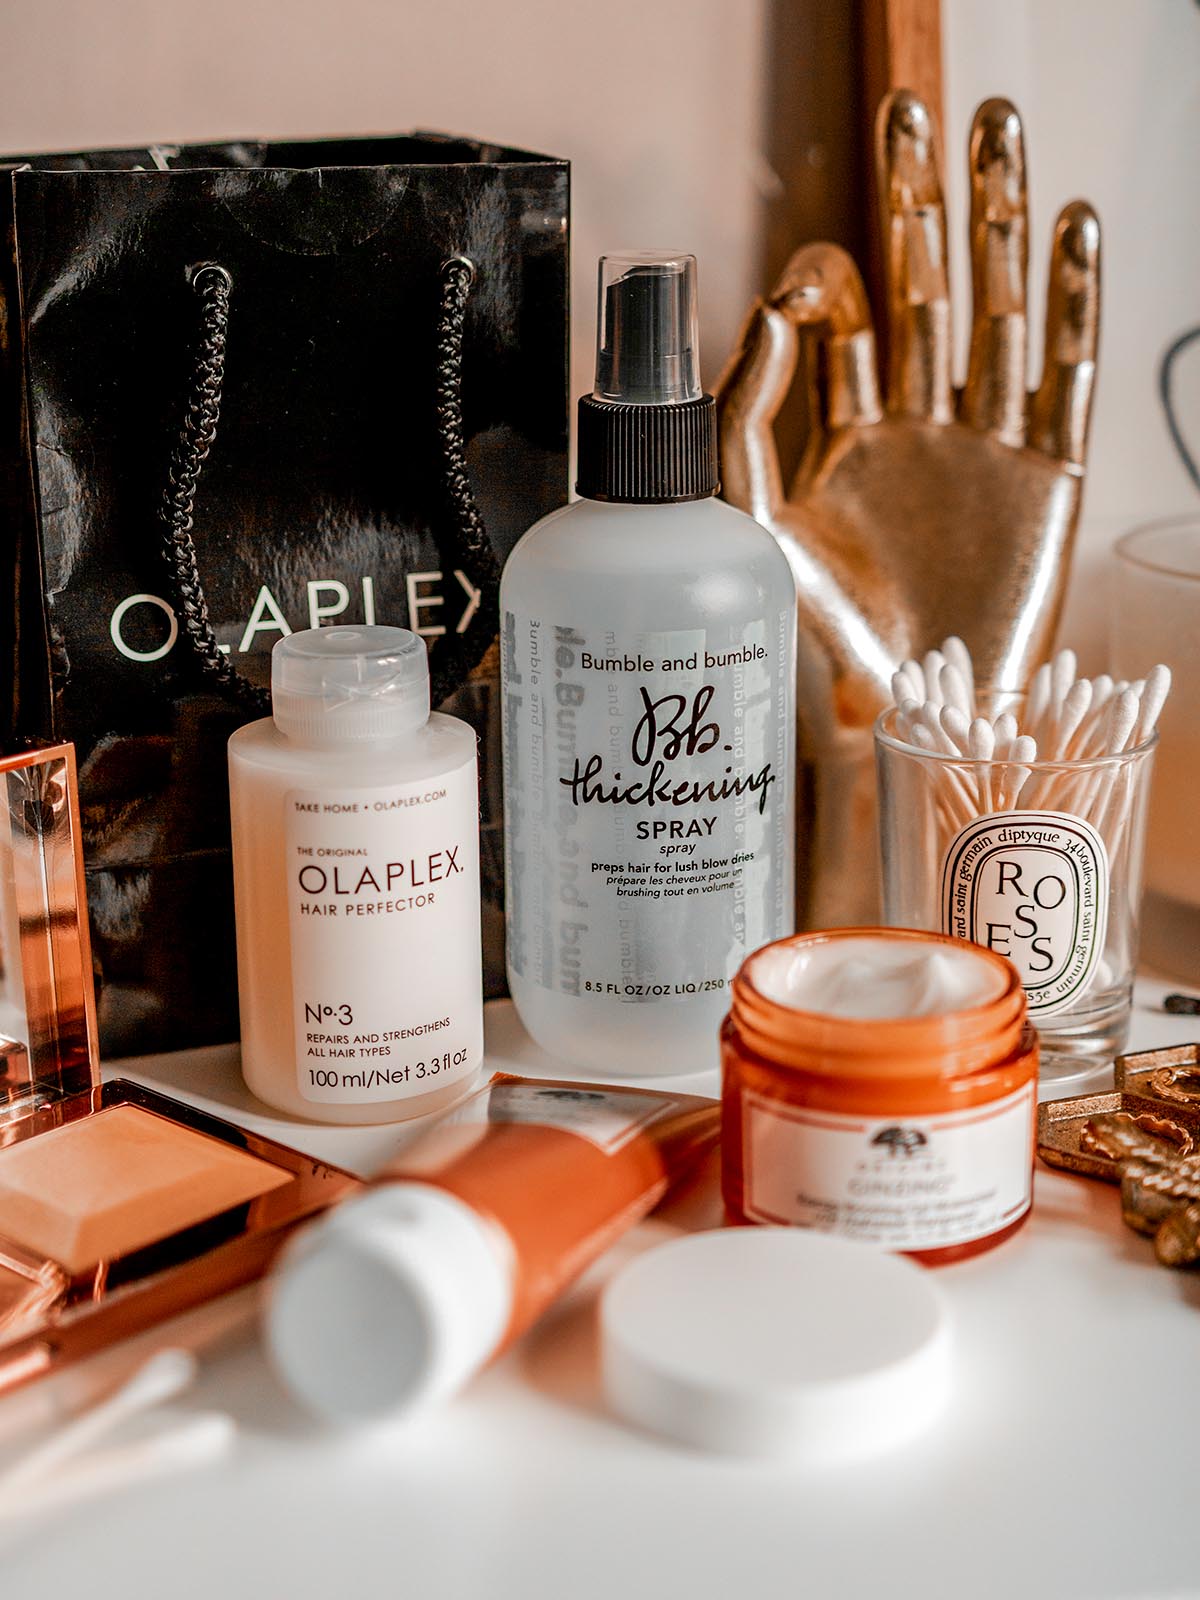 Finding The Best Beauty Deals This Black Friday.